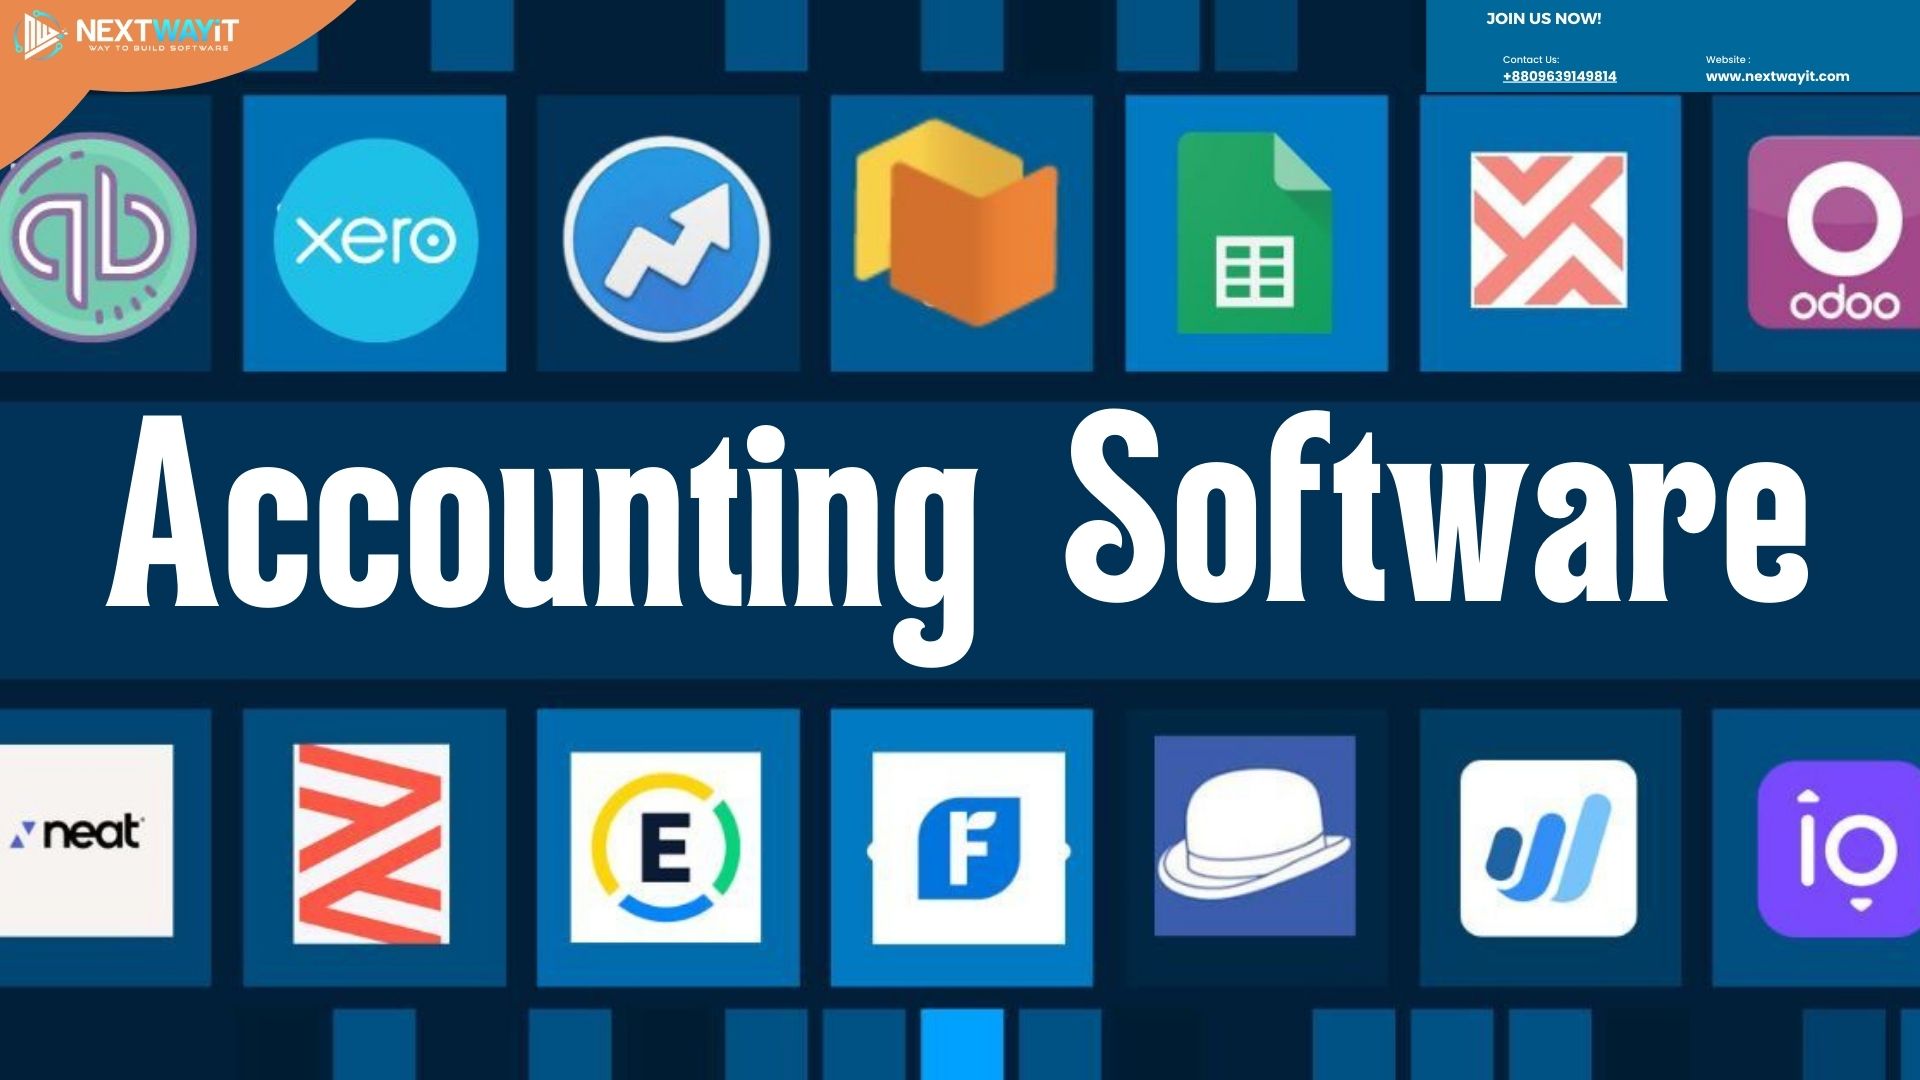 Accounting Software Solutions.